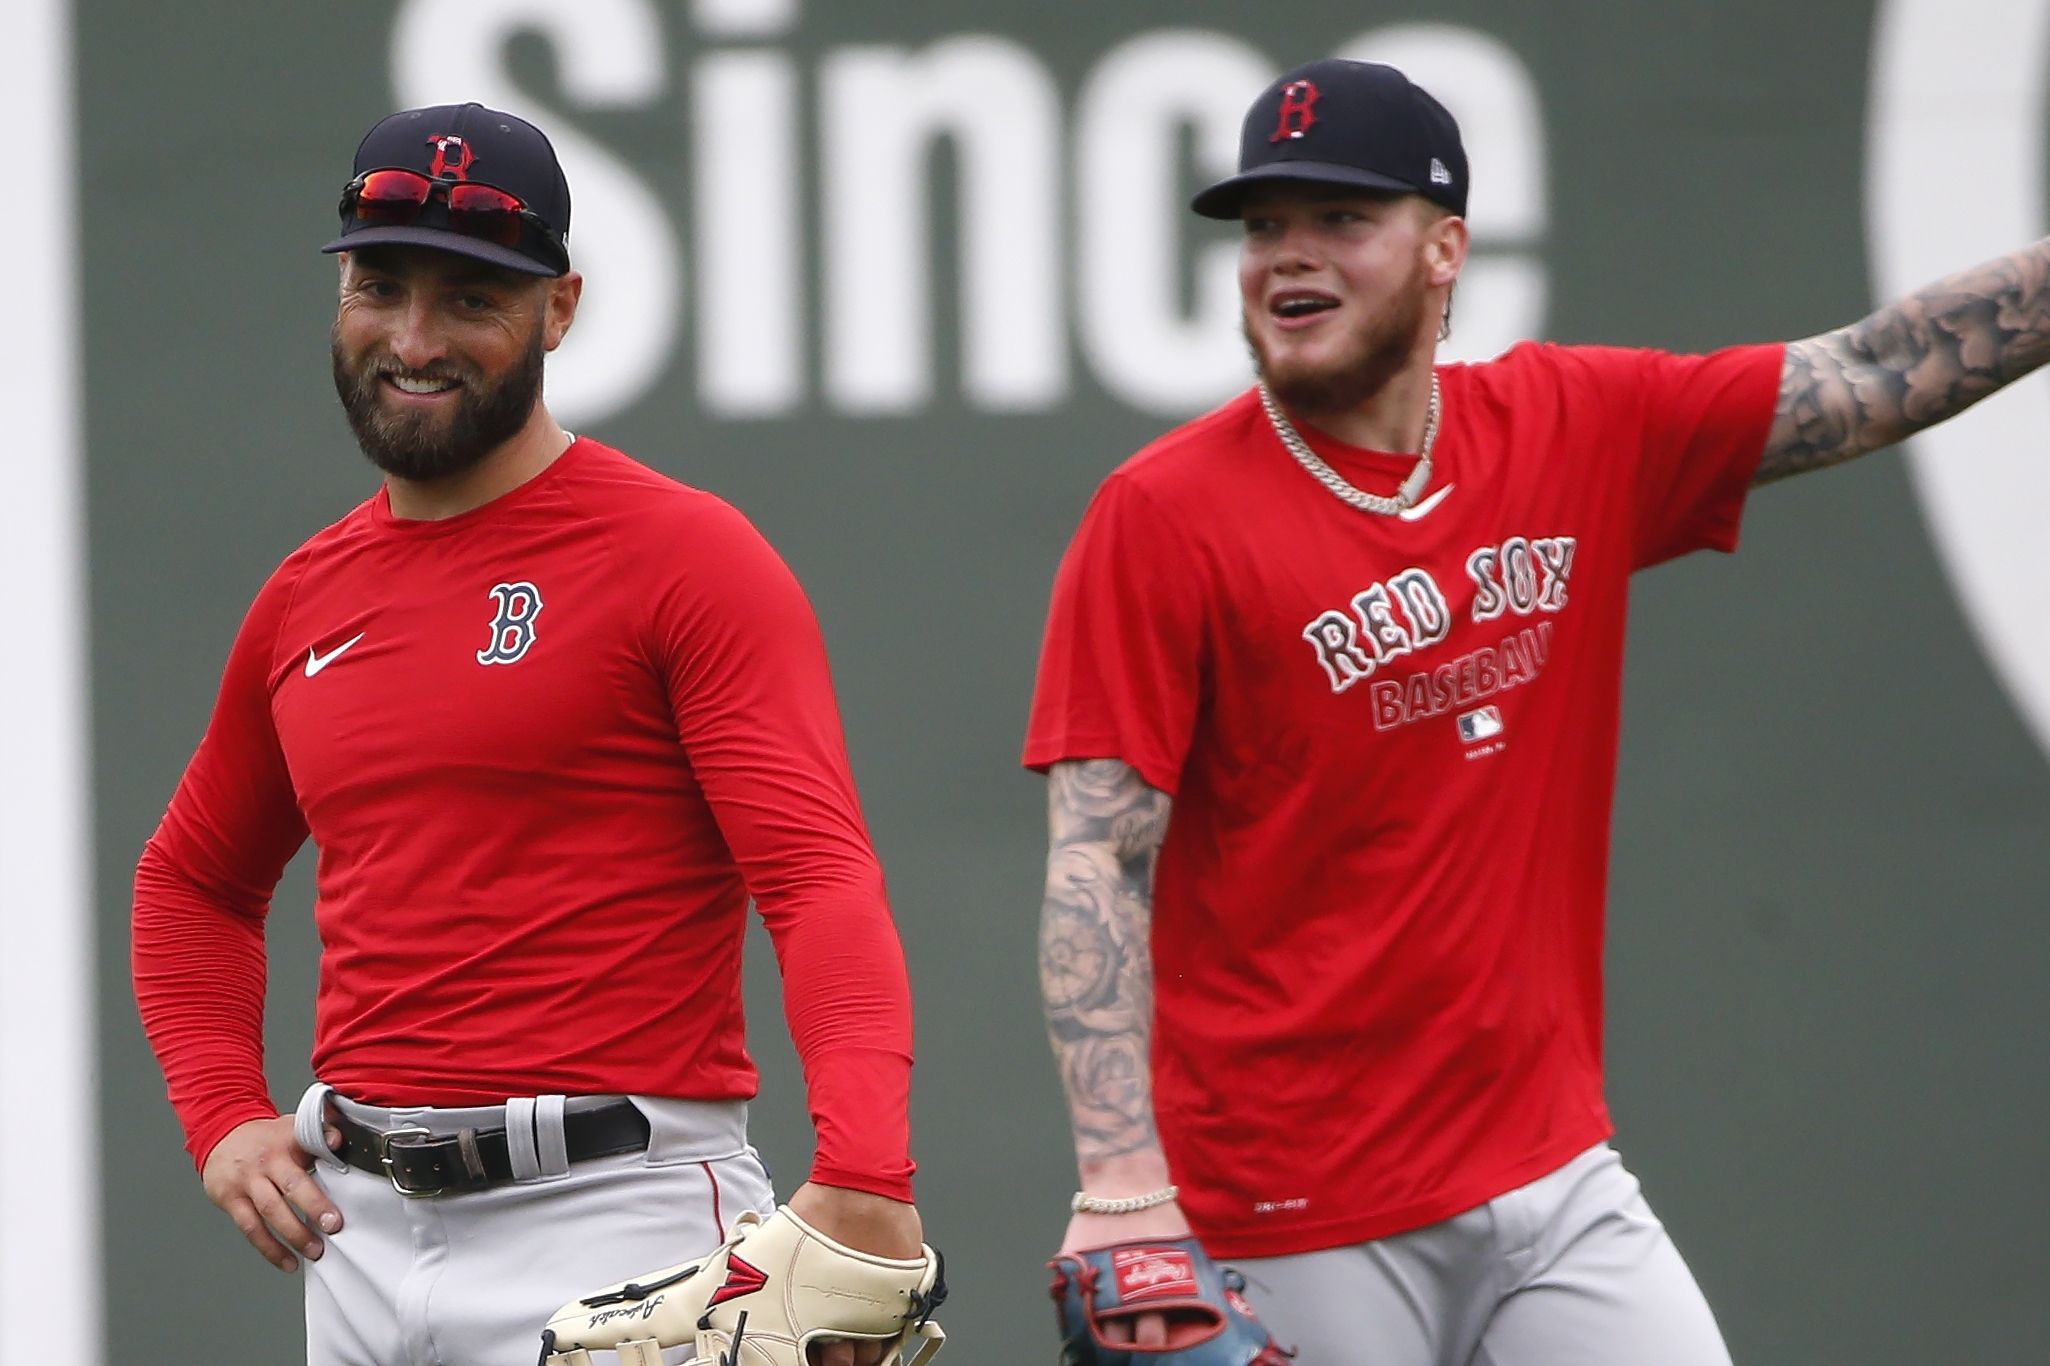 Boston Red Sox's Kevin Pillar entered 2020 ready to show he's